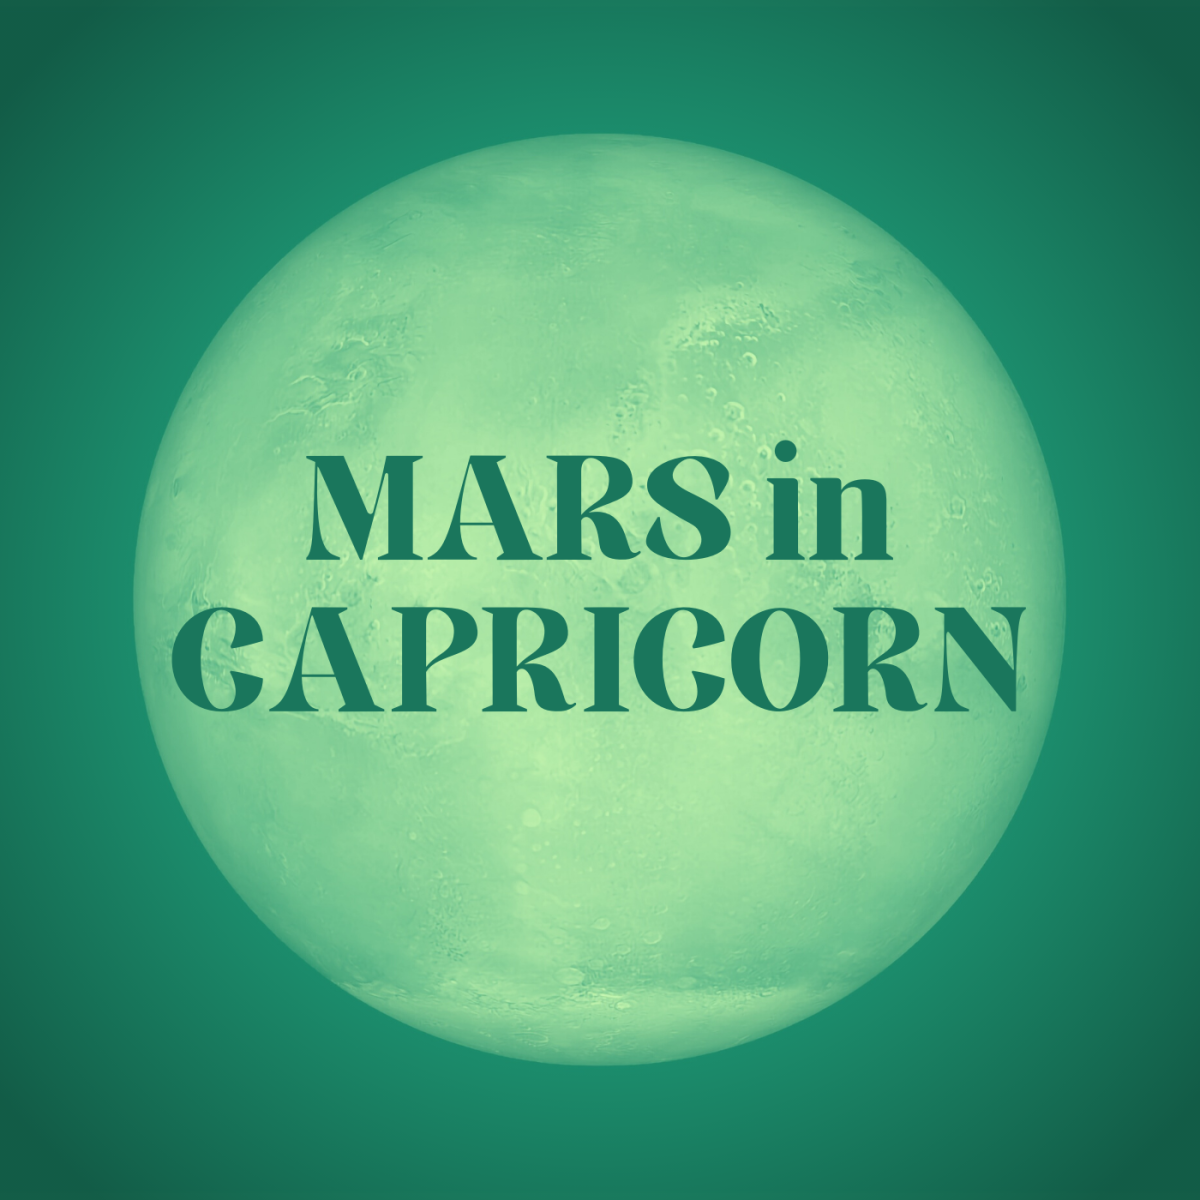 How does having Mars in Capricorn affect your drive for intimacy?